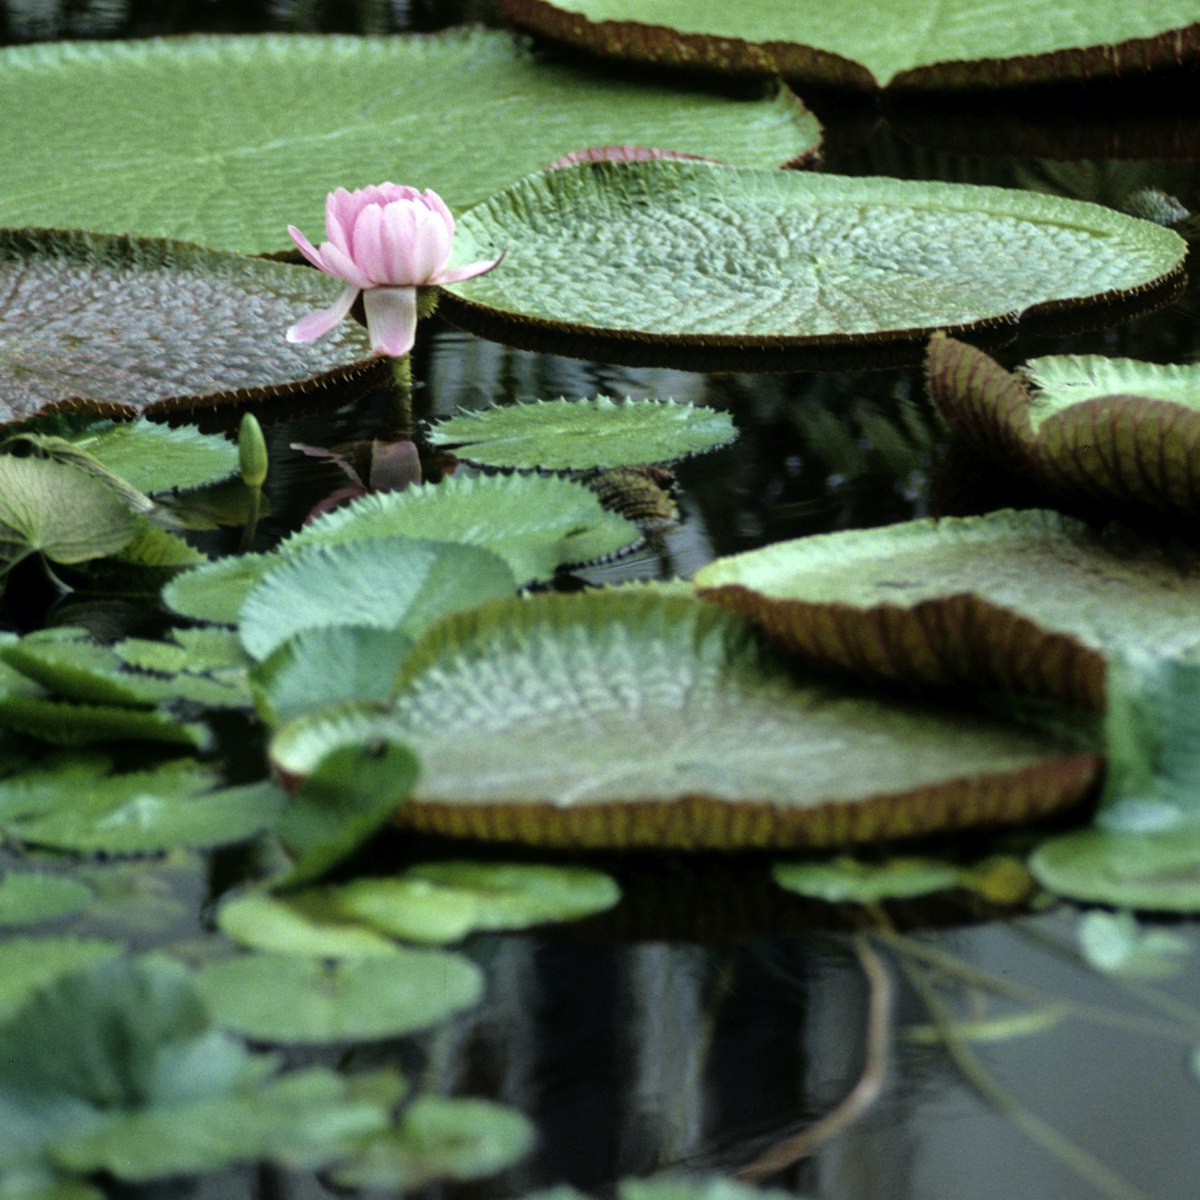 Amazonian tropical rainforest environment, giant water lily pads on a calm river water surface.
1324092776